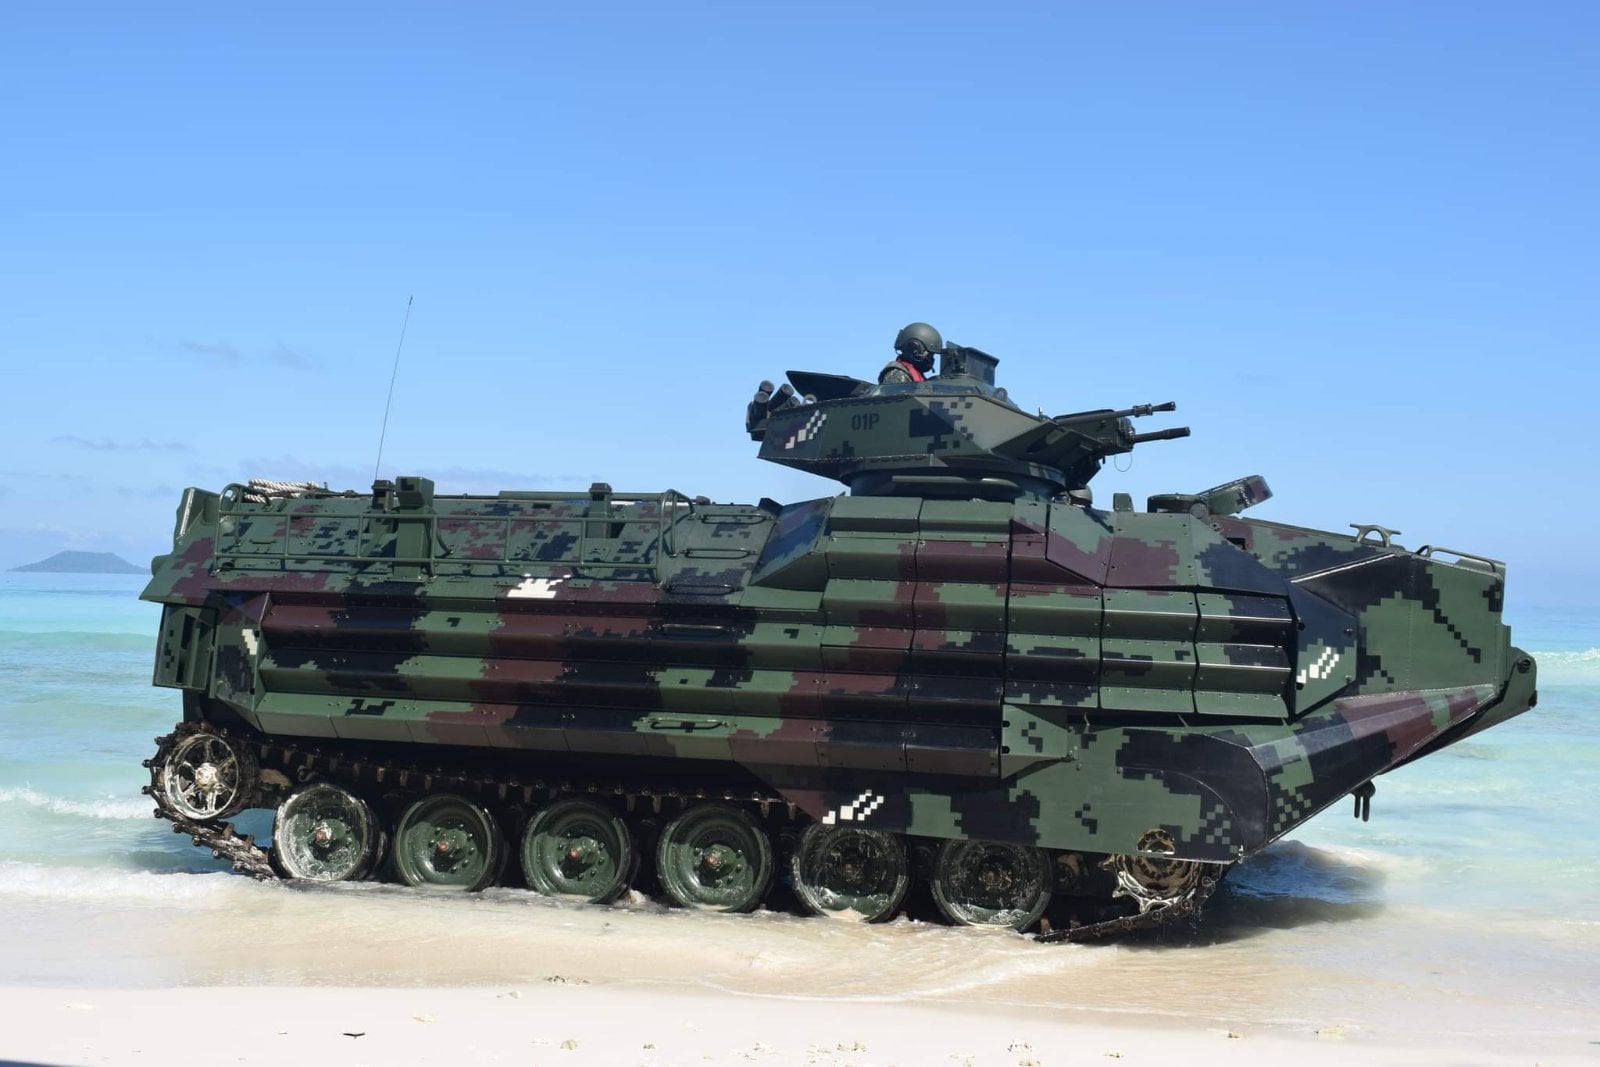 Philippine Navy Concludes Exercise Pagsisikap 2021 with Amphibious Landing Operations